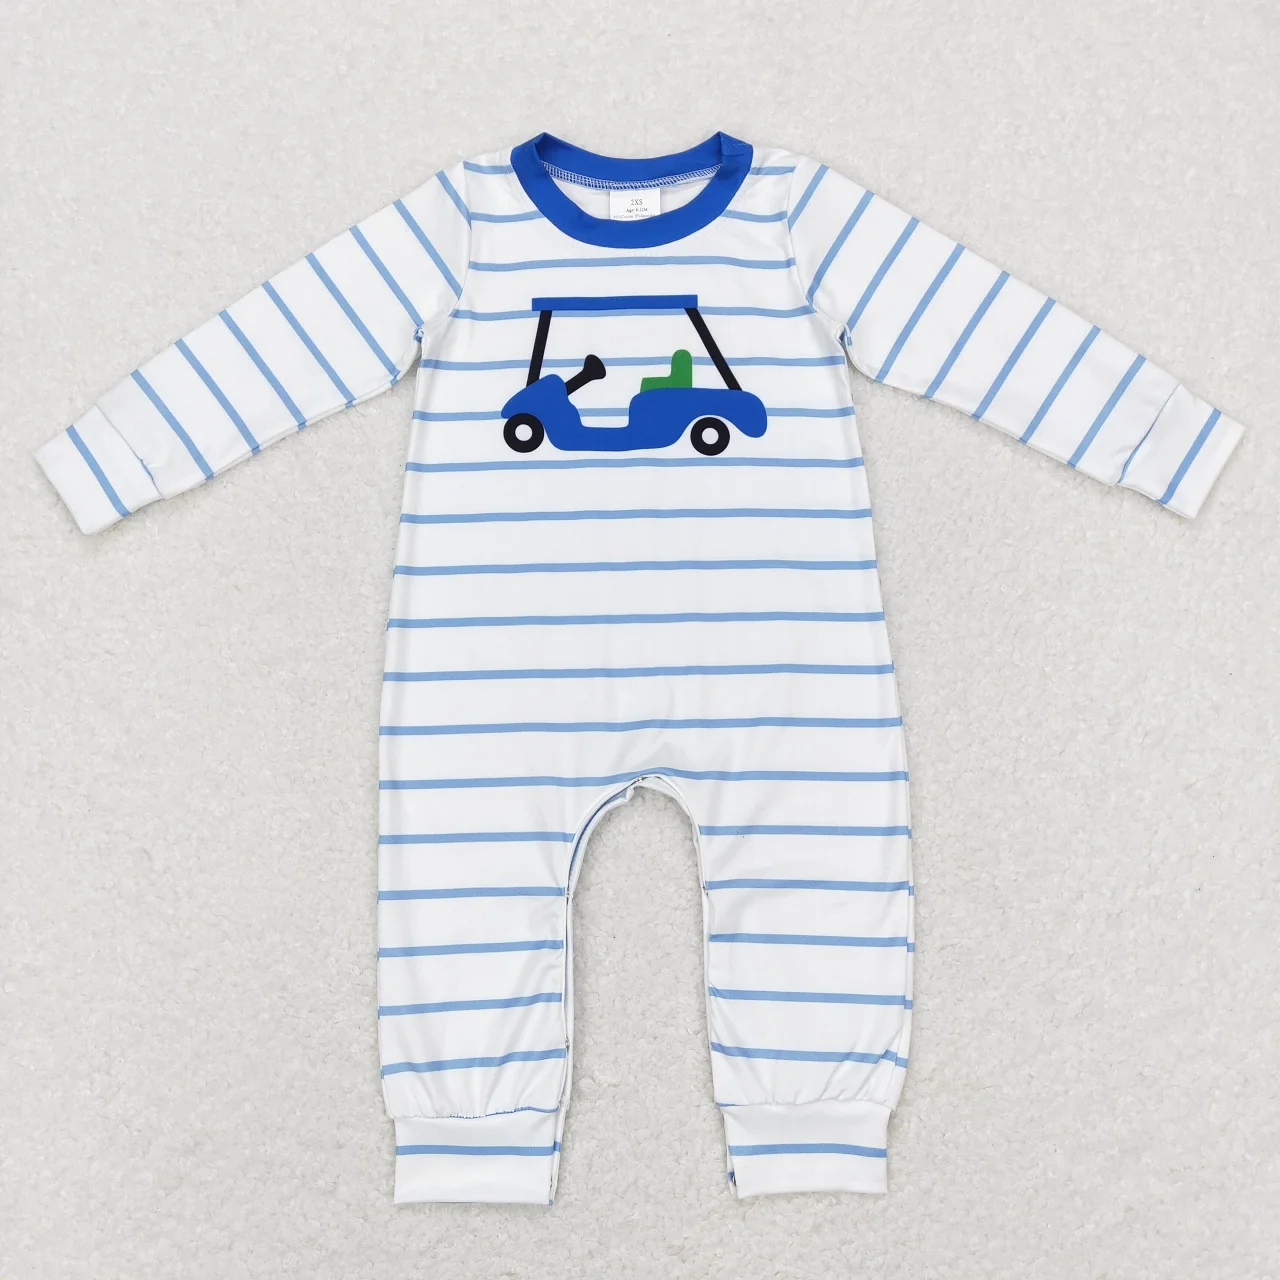 

Wholesale Baby Boy Toddler Stripes Romper Kids Buttons One-piece Newborn Coverall Bodysuit Long Sleeves Jumpsuit